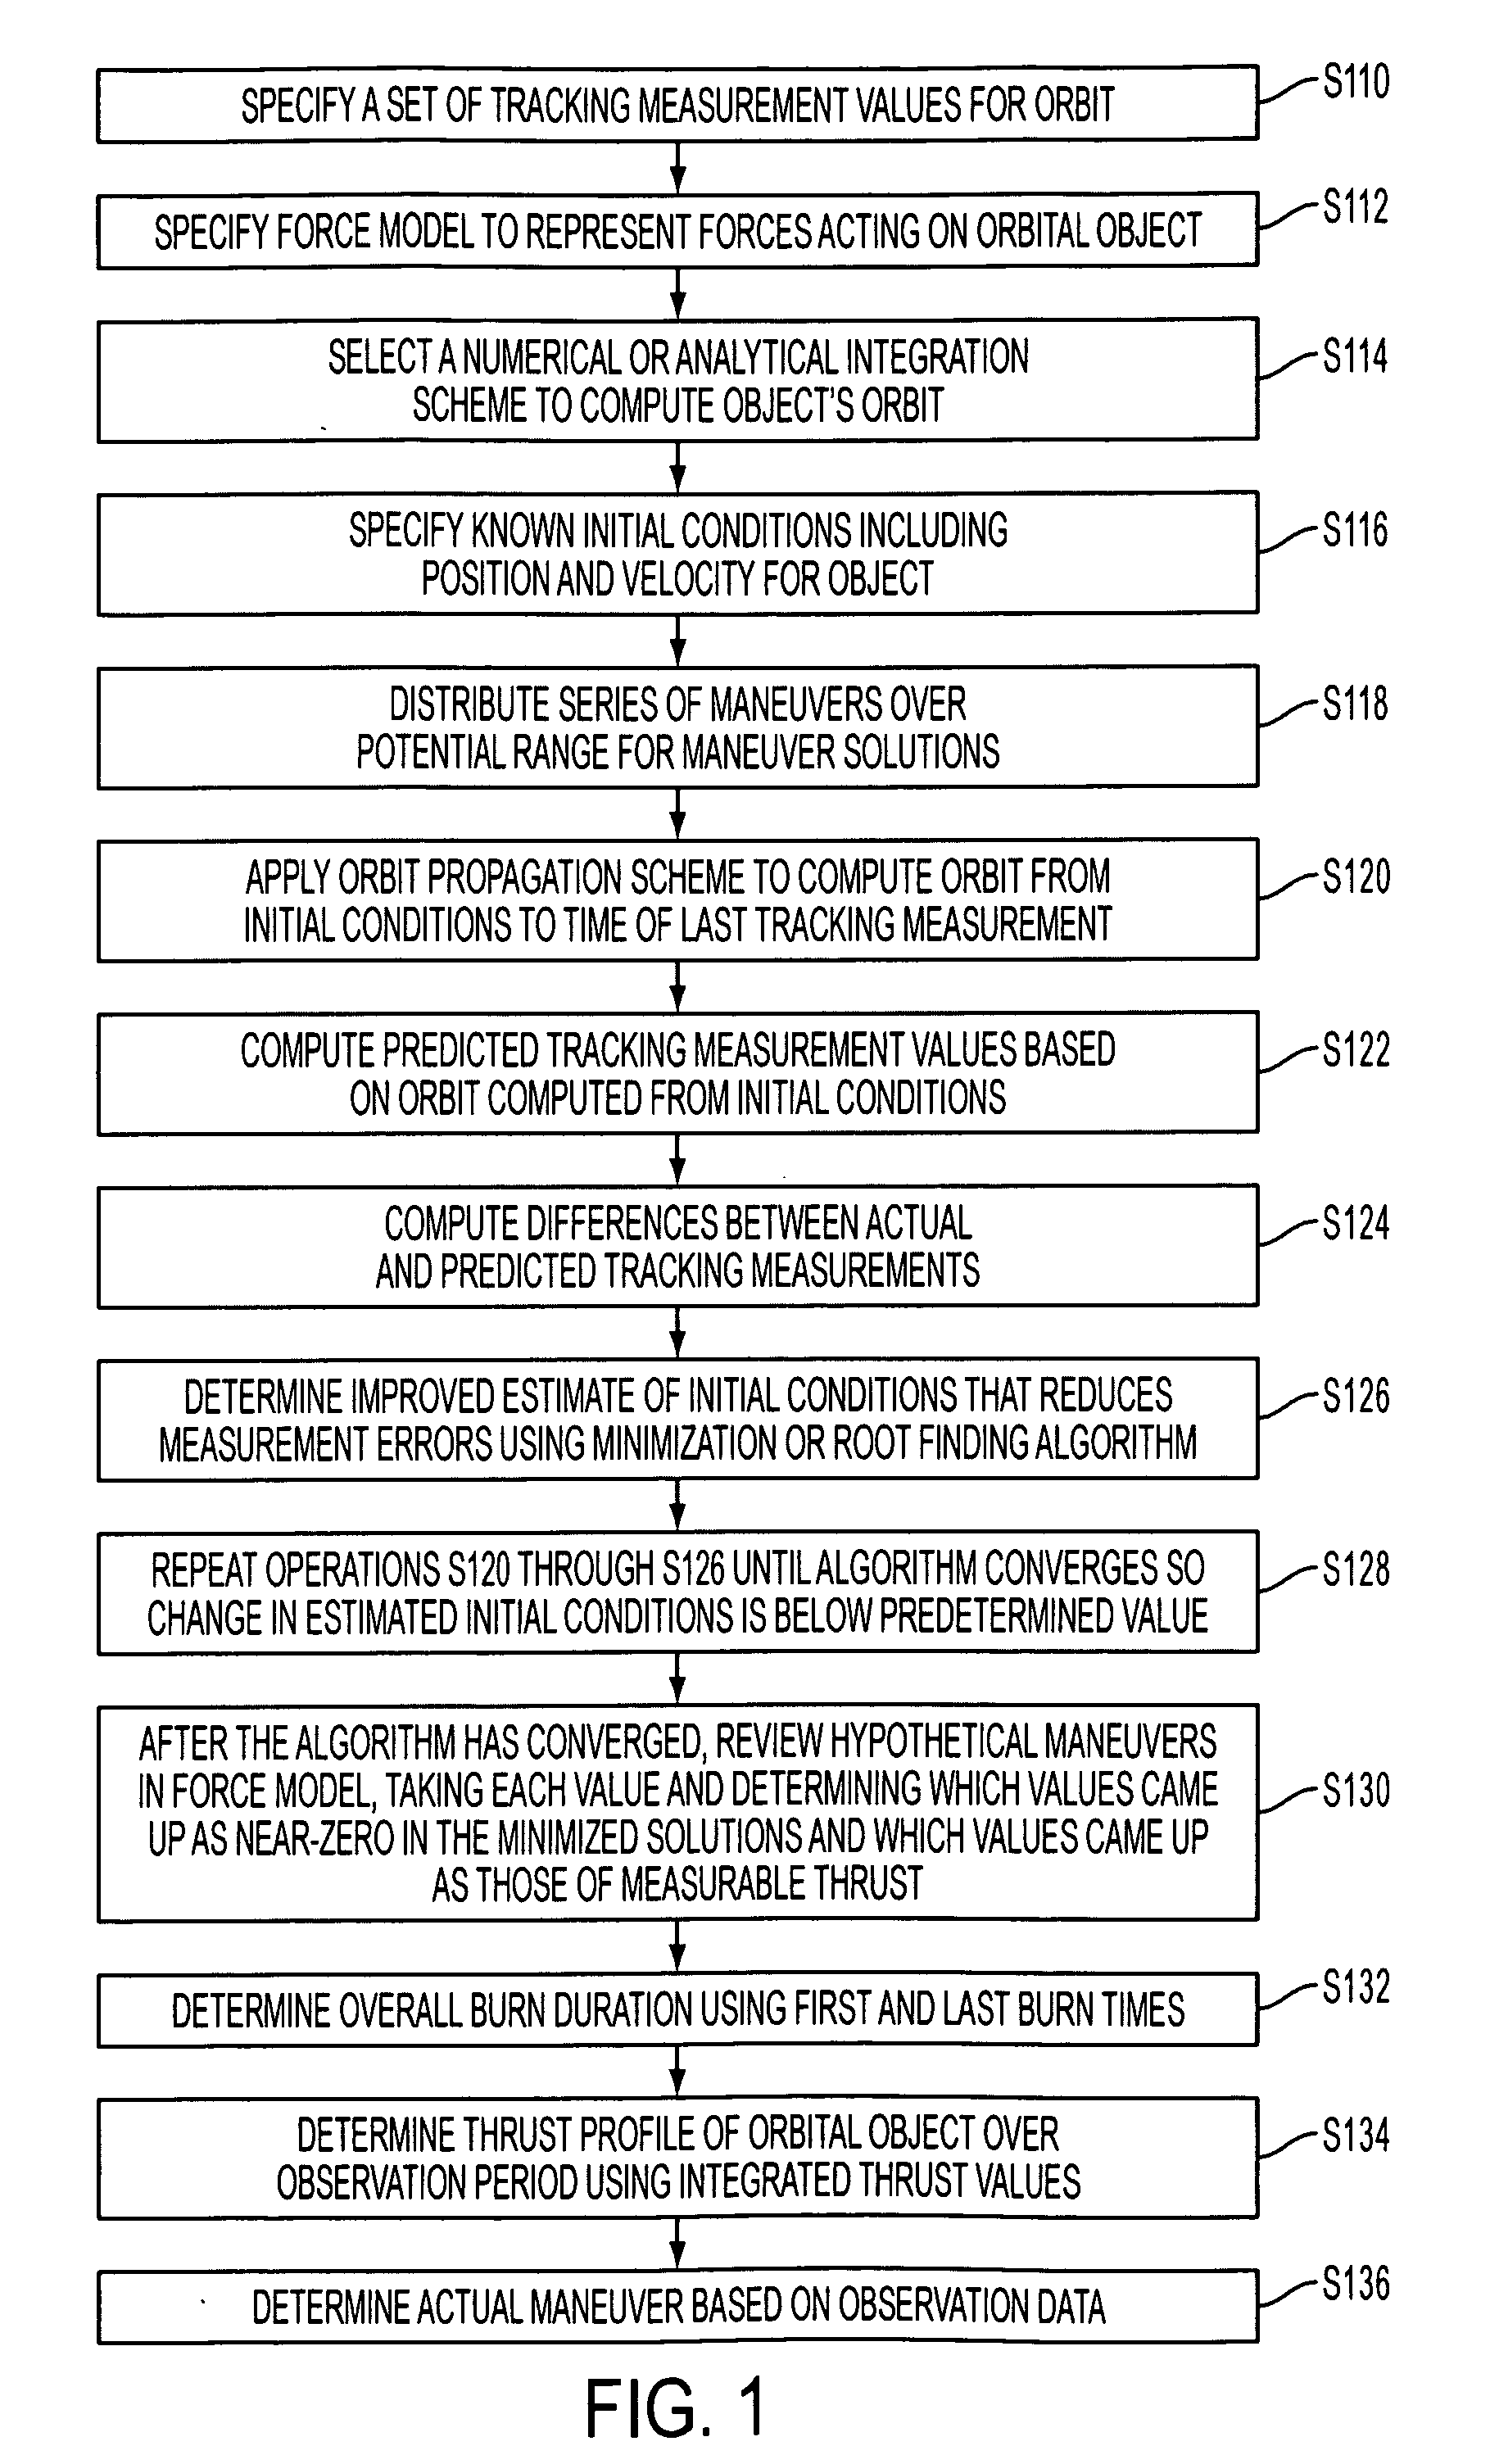 Method and apparatus for initial orbit determination using high-precision orbit propagation and maneuver modeling